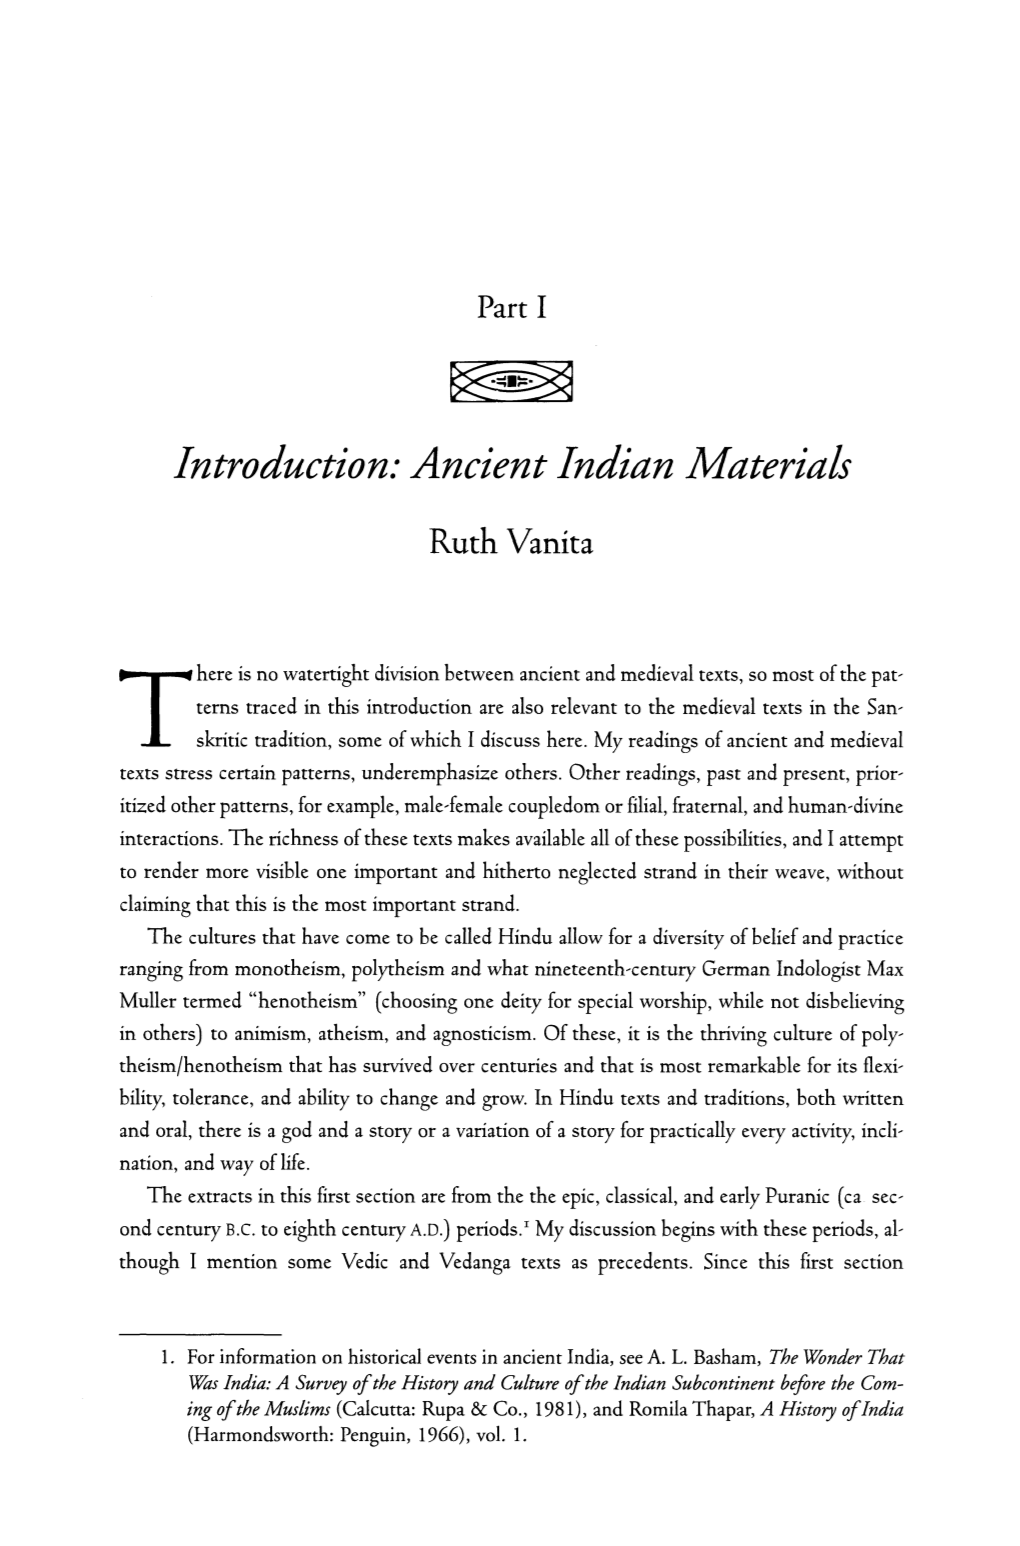 Introduction: Ancient Indian Materials